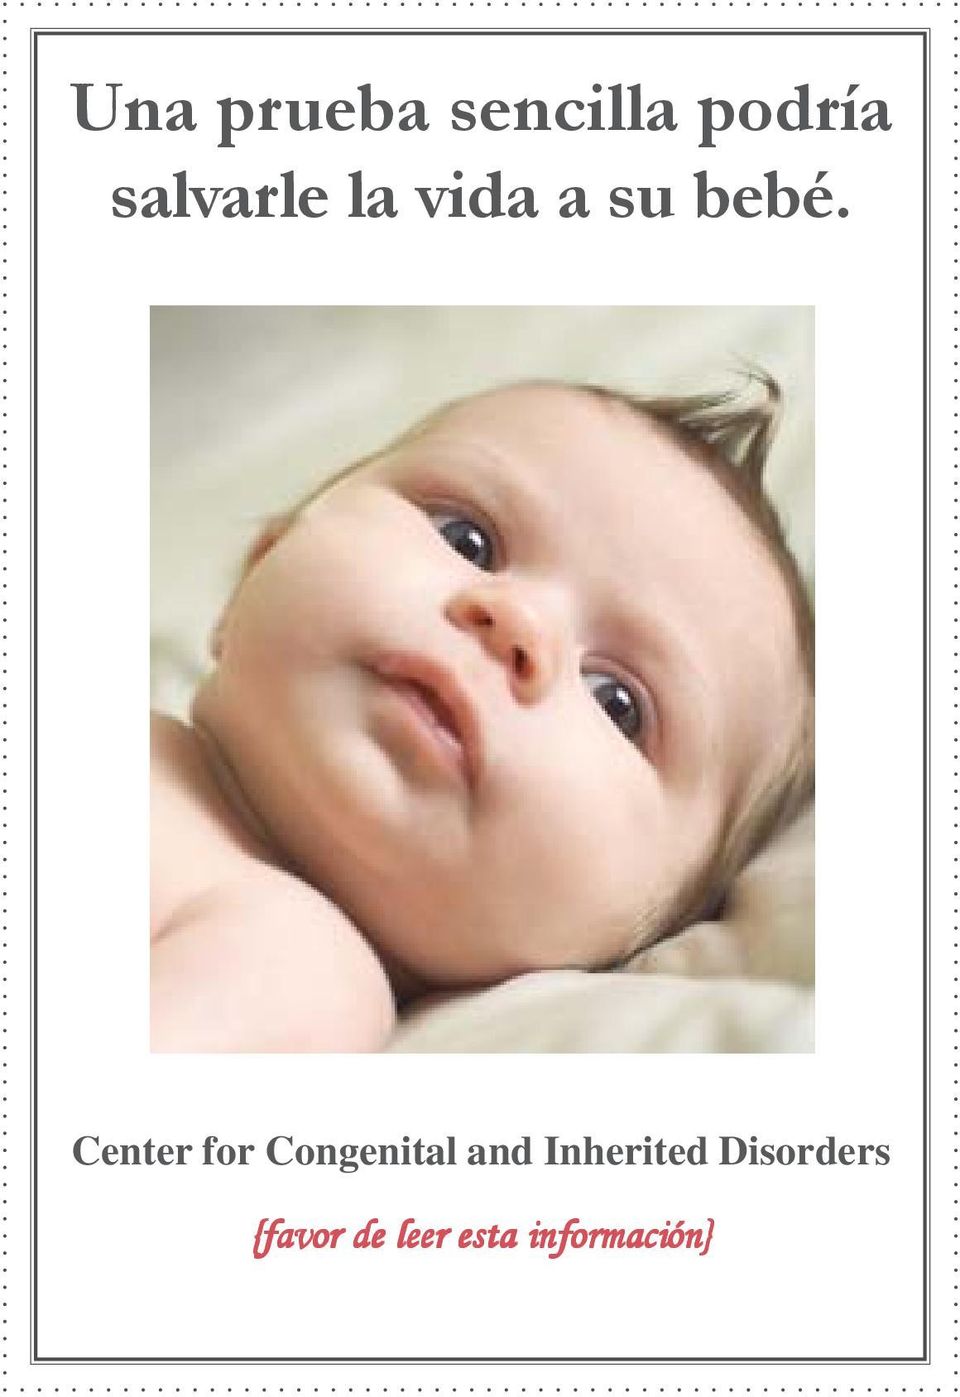 Center for Congenital and